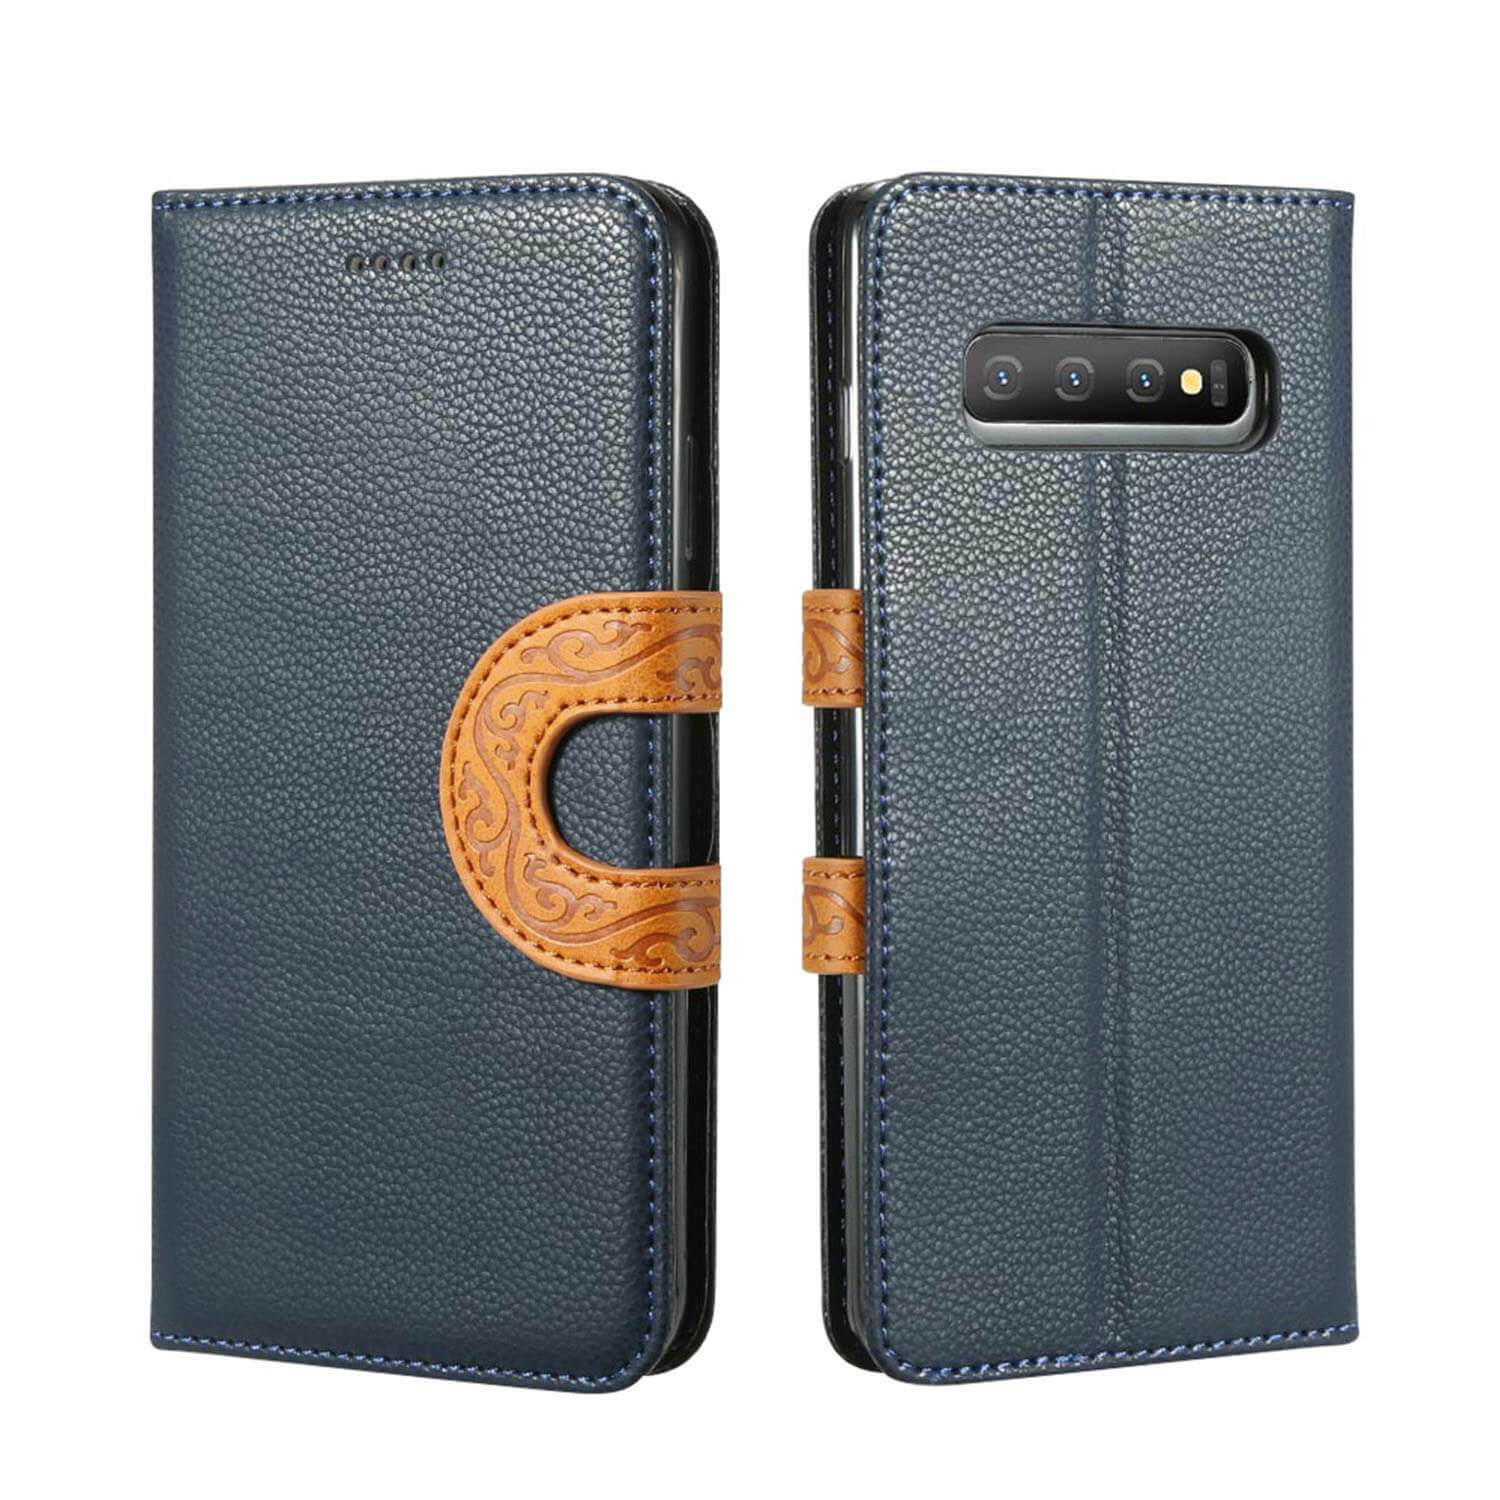 Samsung Galaxy S10+ Case - Leather, Card Slots, Tribal Strap